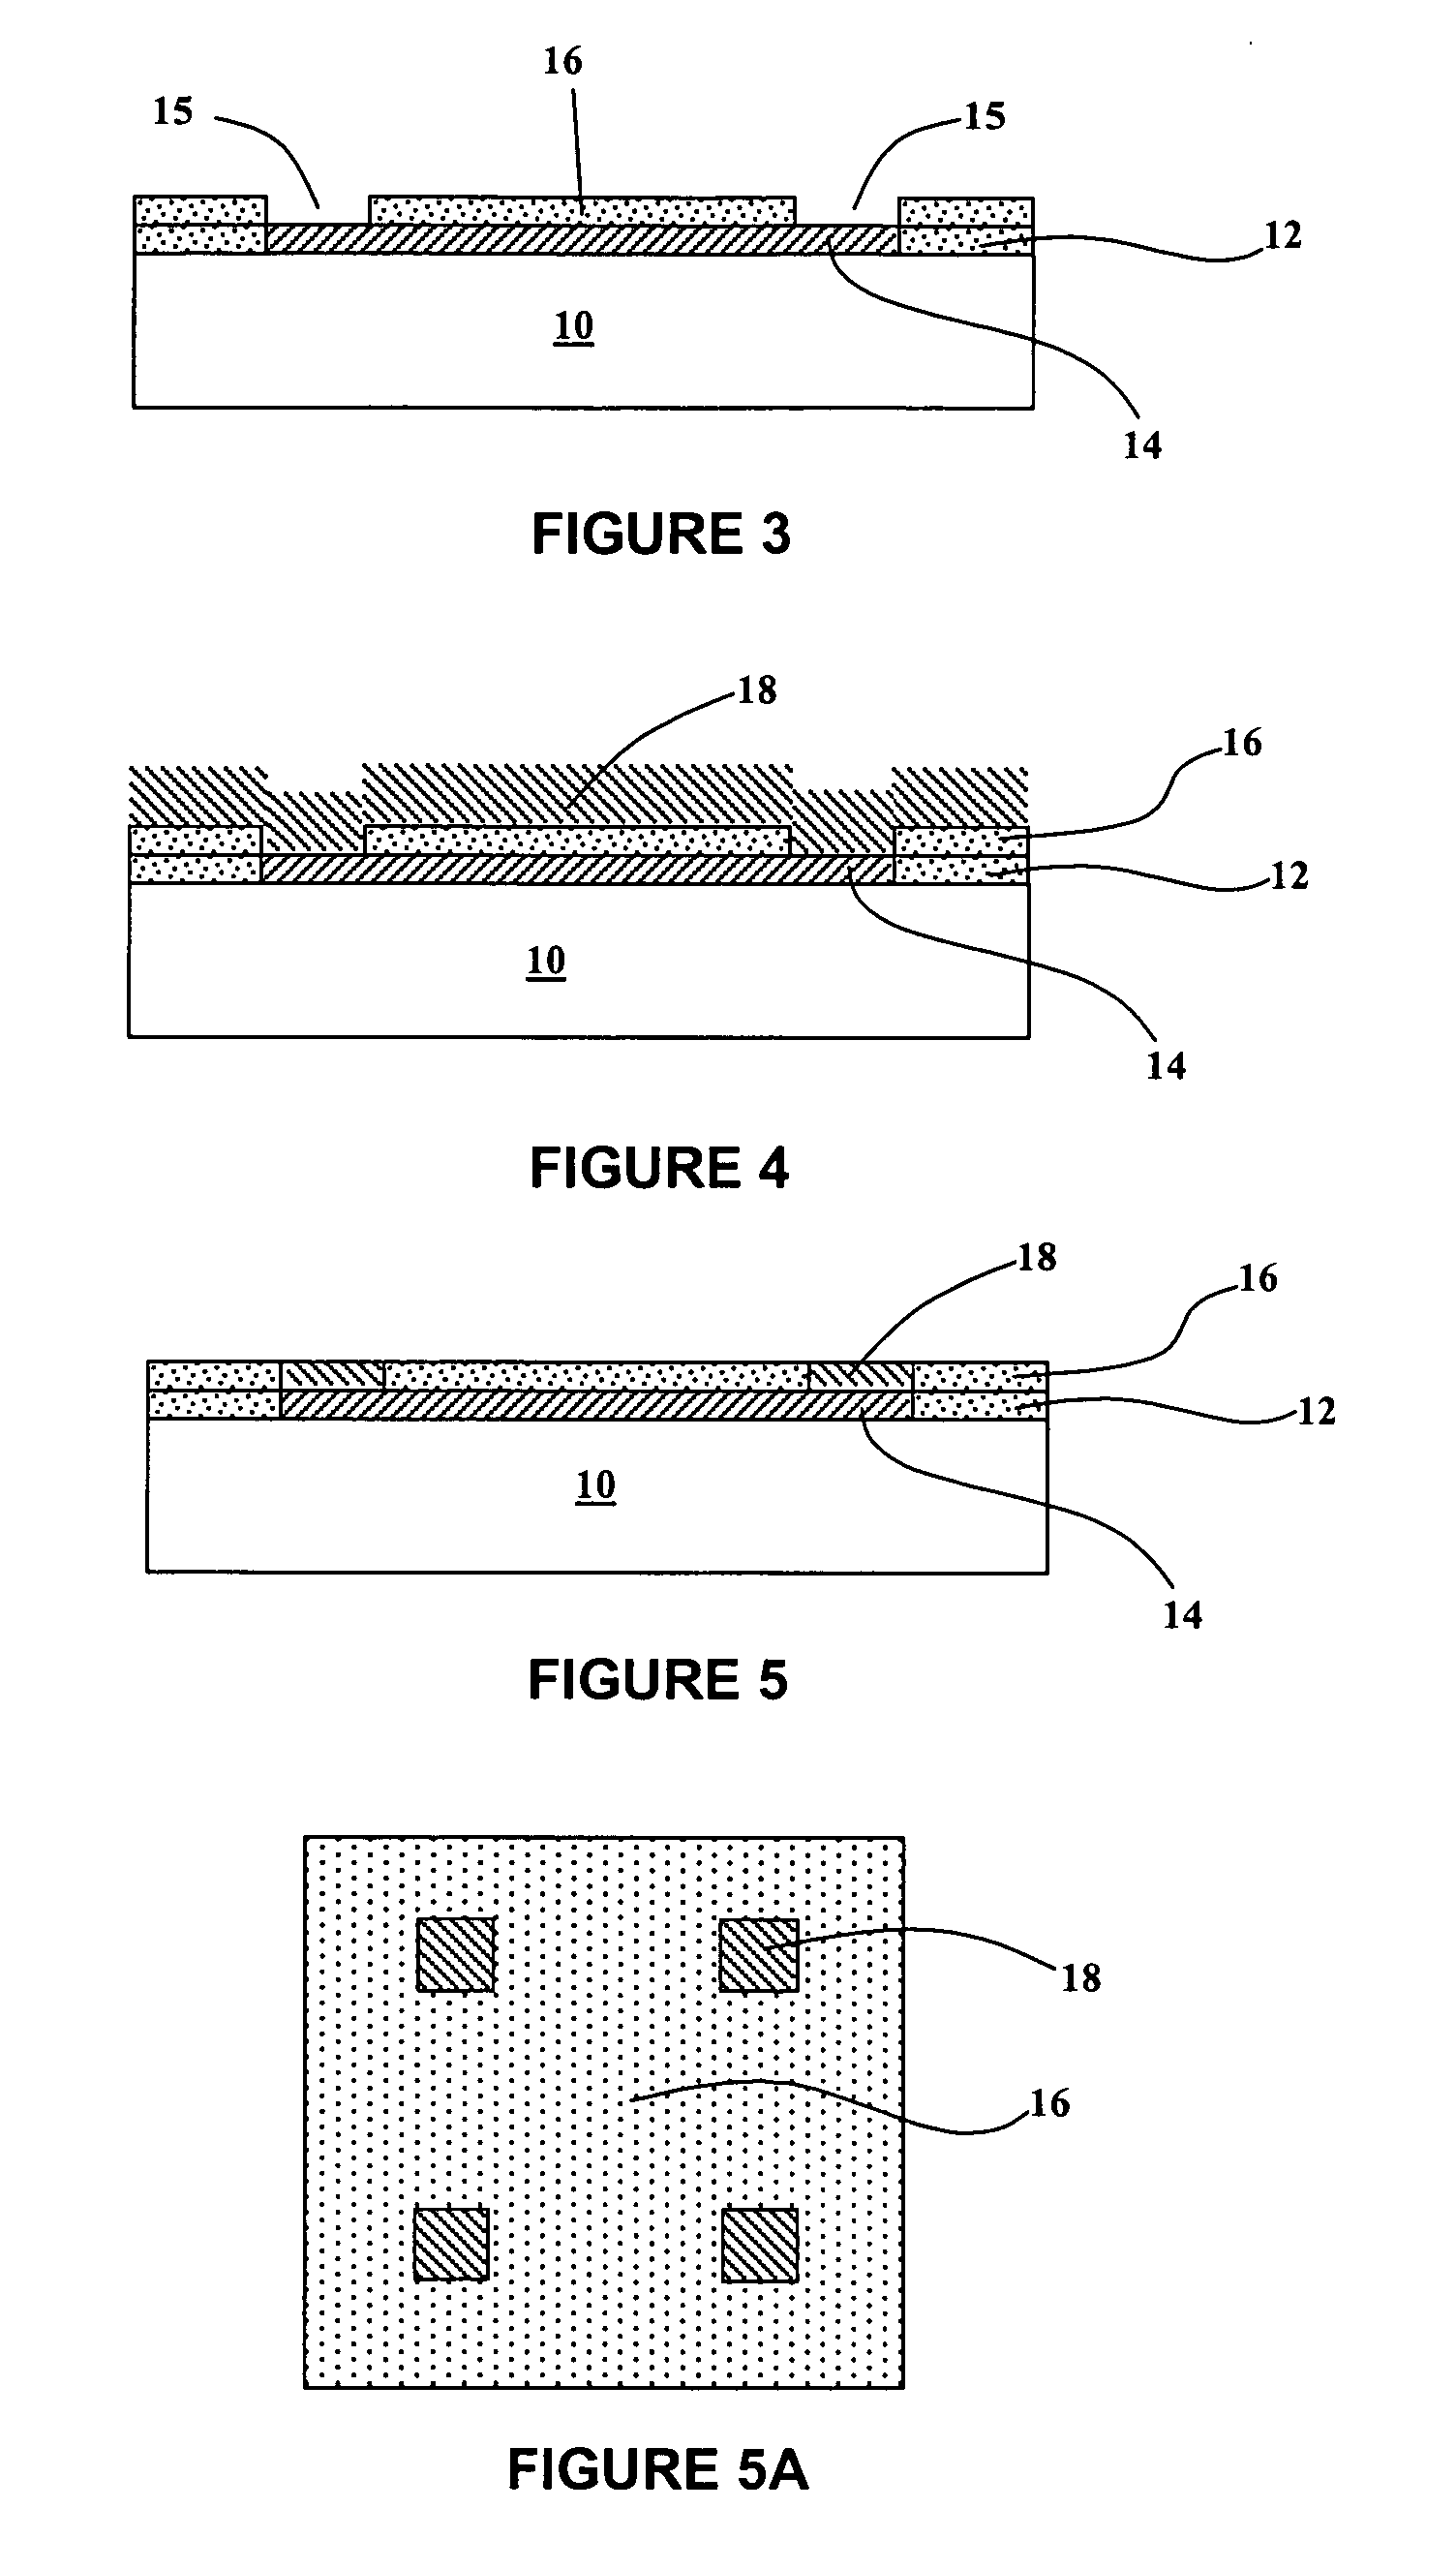 Nickel-coated free-standing silicon carbide structure for sensing fluoro or halogen species in semiconductor processing systems, and processes of making and using same